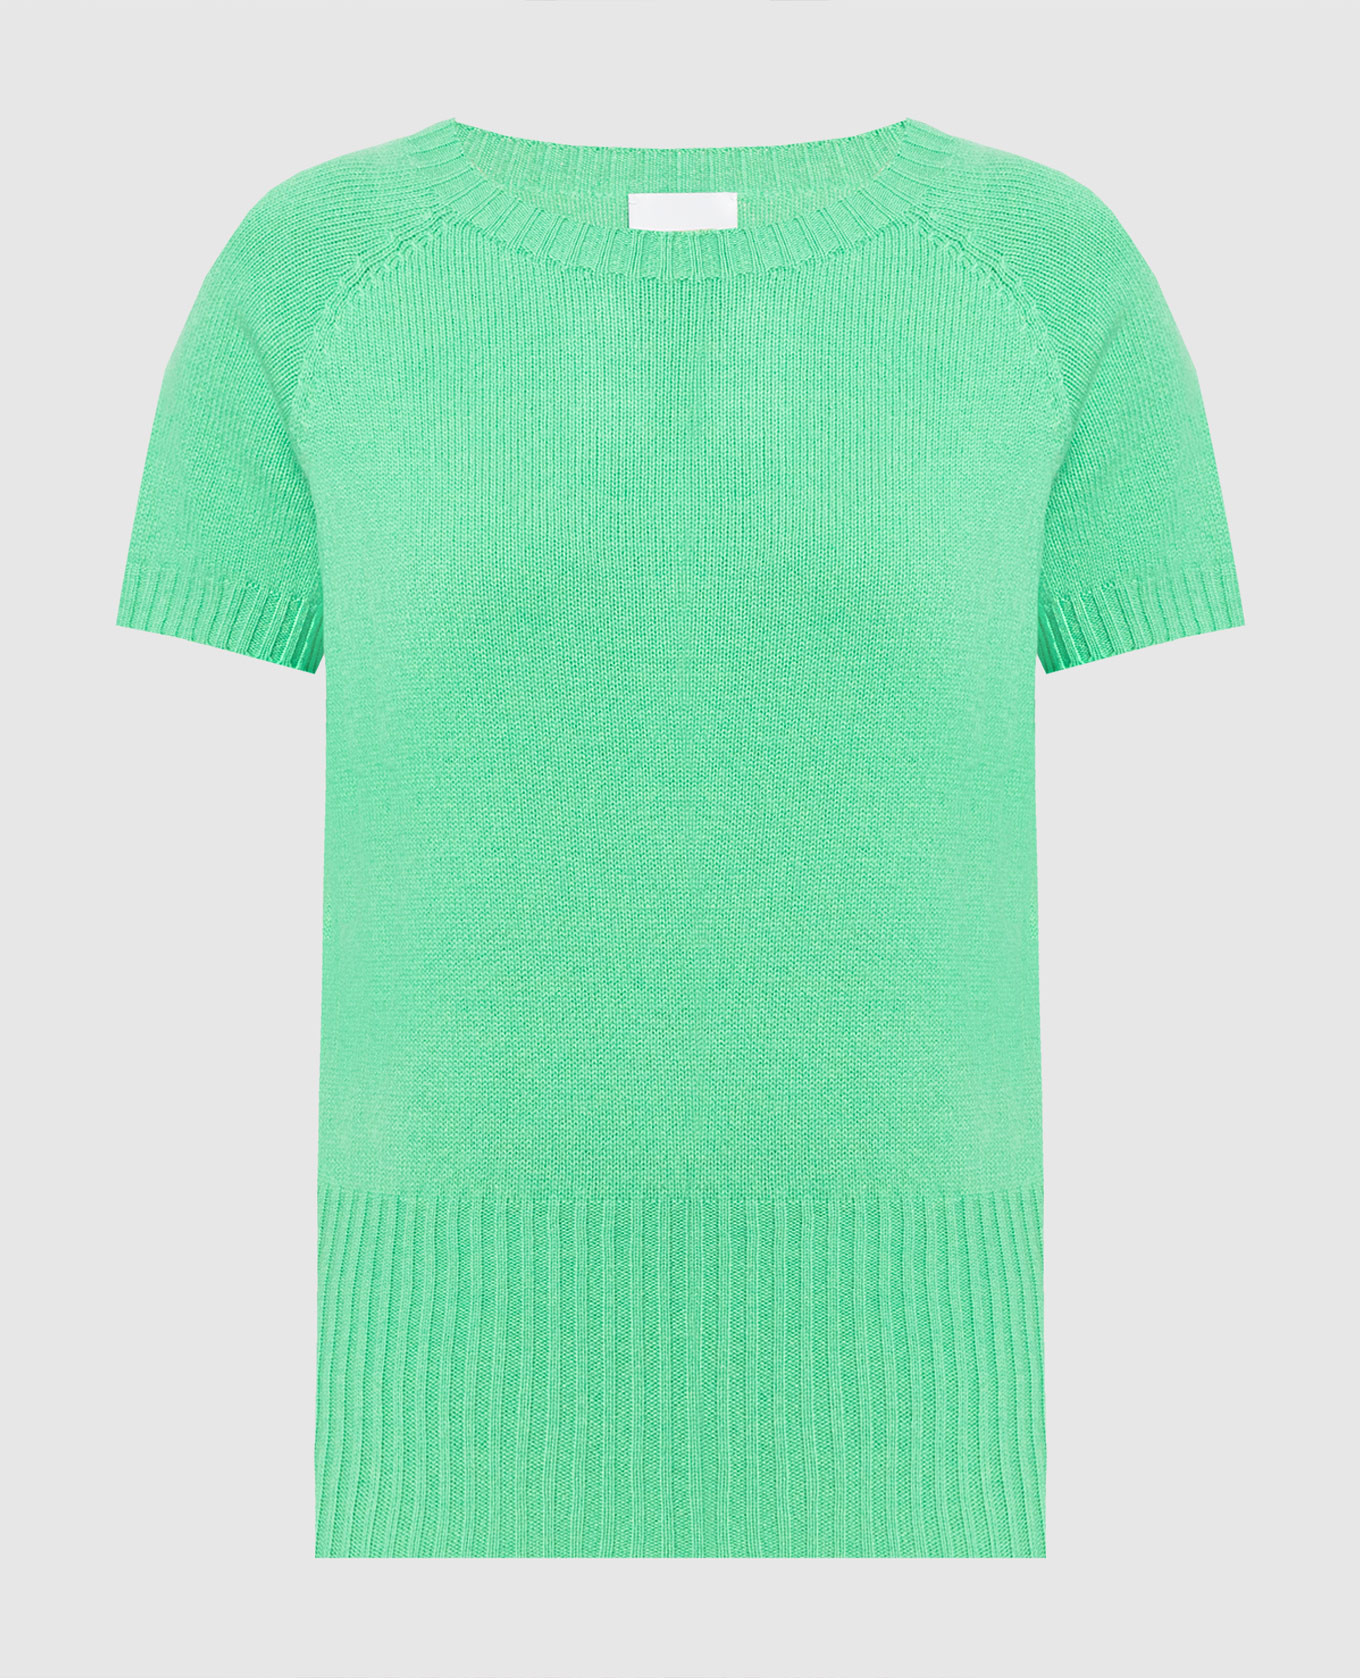 Green wool and cashmere jumper